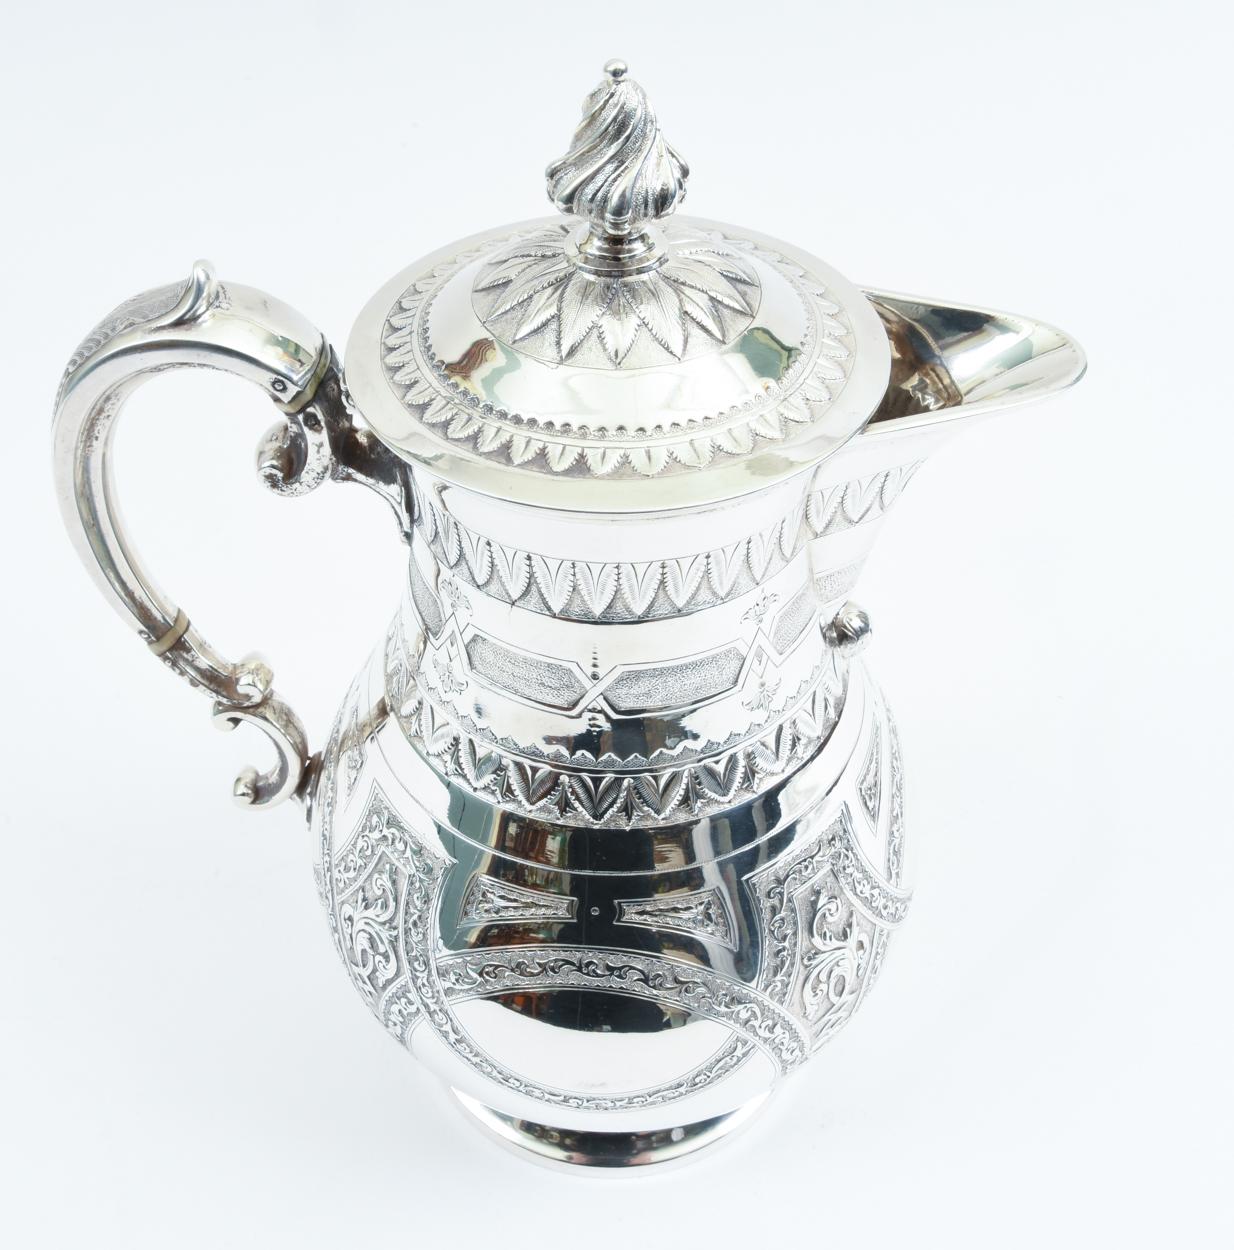 Ornate Exterior Design Details English Silver Plate Tea or Coffee Pot 3